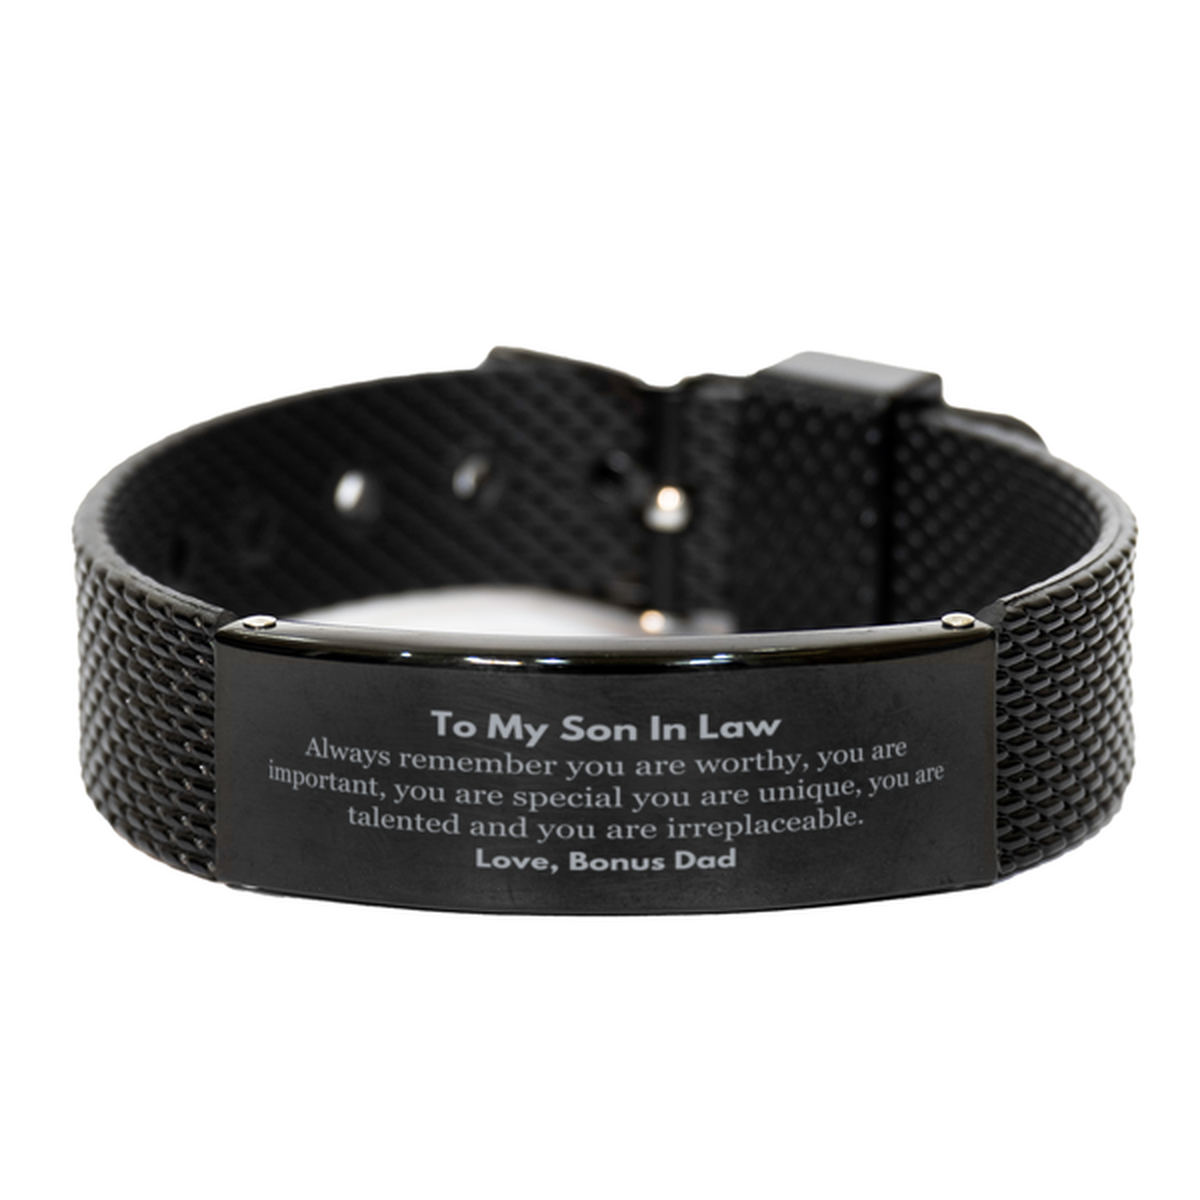 Son In Law Birthday Gifts from Bonus Dad, Inspirational Black Shark Mesh Bracelet for Son In Law Christmas Graduation Gifts for Son In Law Always remember you are worthy, you are important. Love, Bonus Dad